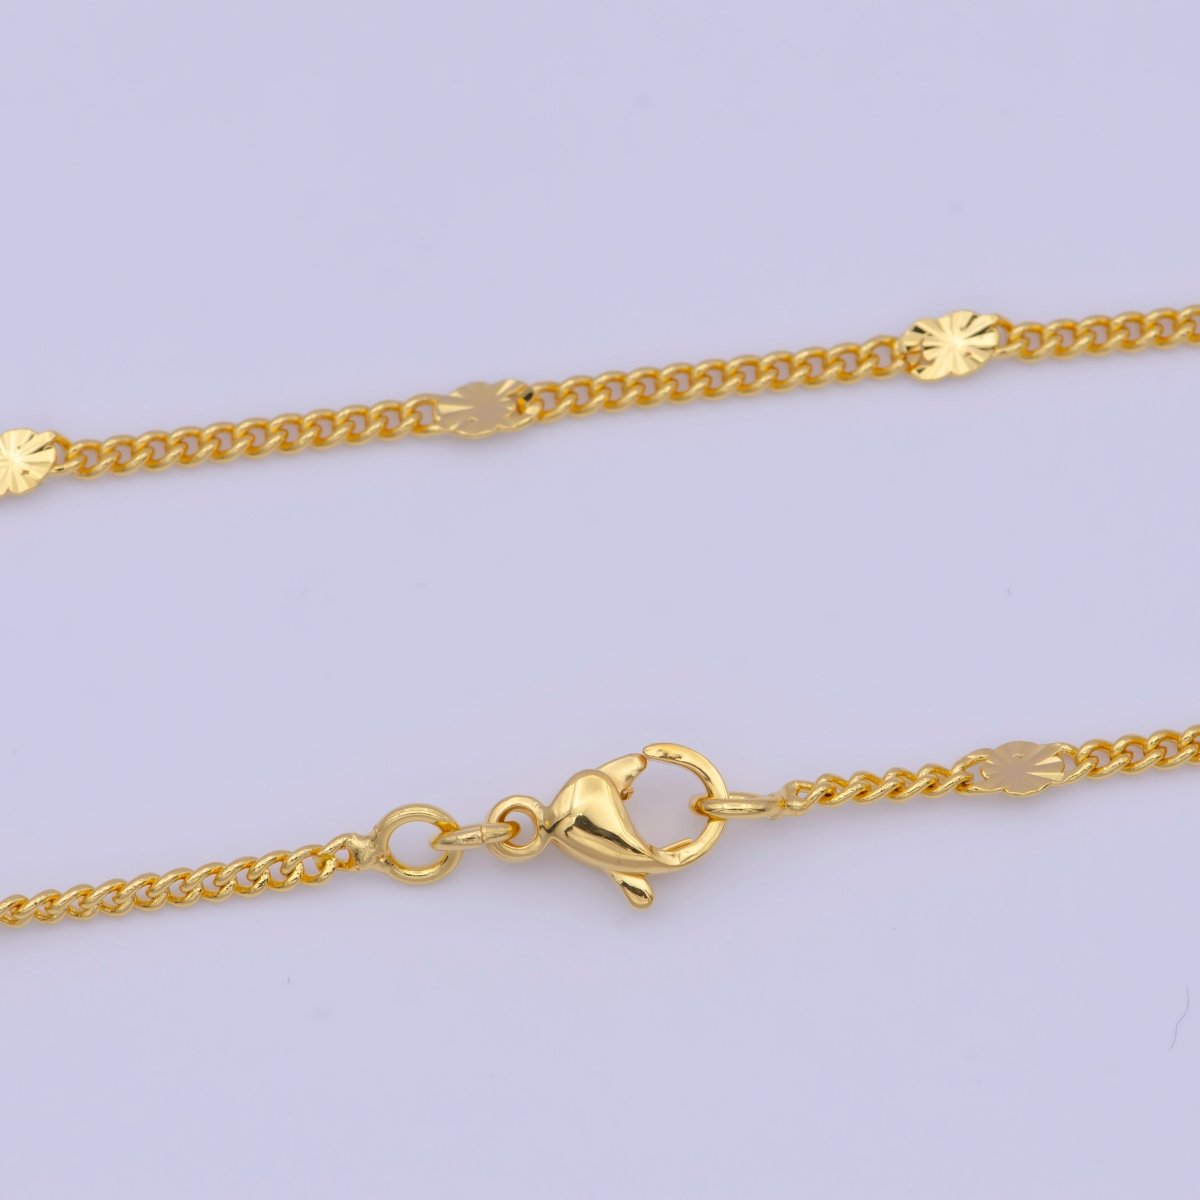 24K Gold Filled Dainty Sunburst Curb Chain Minimalist Necklace Satellite Chain Necklace 1.6mm Width Ready to Wear | WA-1128 WA-1127 Clearance Pricing - DLUXCA